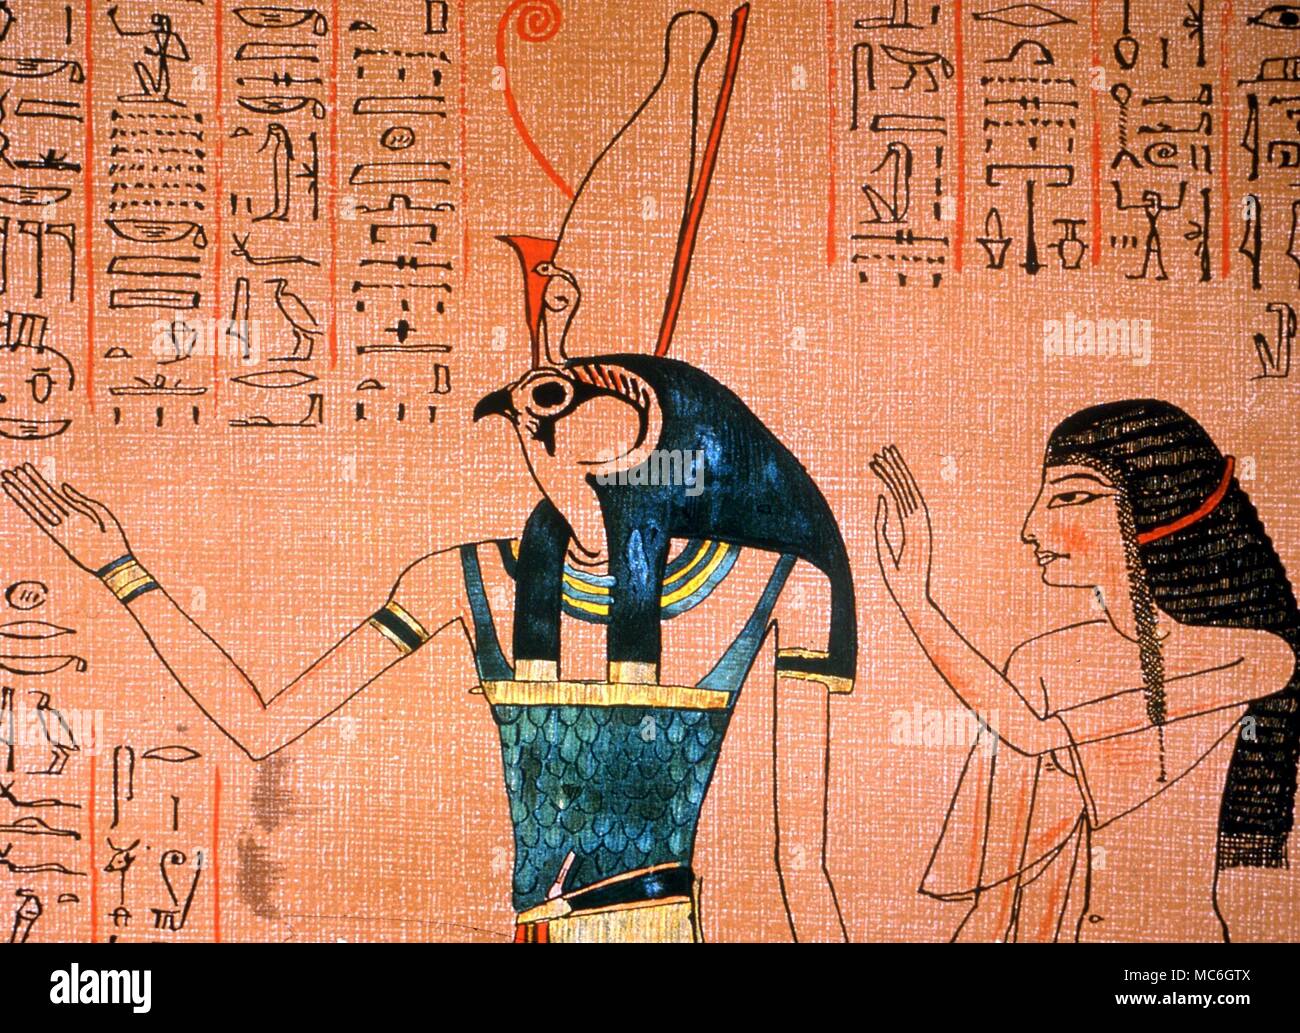 EGYPTIAN MYTHOLOGY - Heru-Netch-Atef. The god - Heru-Netch-Atef leading the soul of the deceased, Lady Anhai, to the pylons of the lower world. From the Papyrus of Anhai, in the Budge lithographs of 'The Book of the Dead' Stock Photo